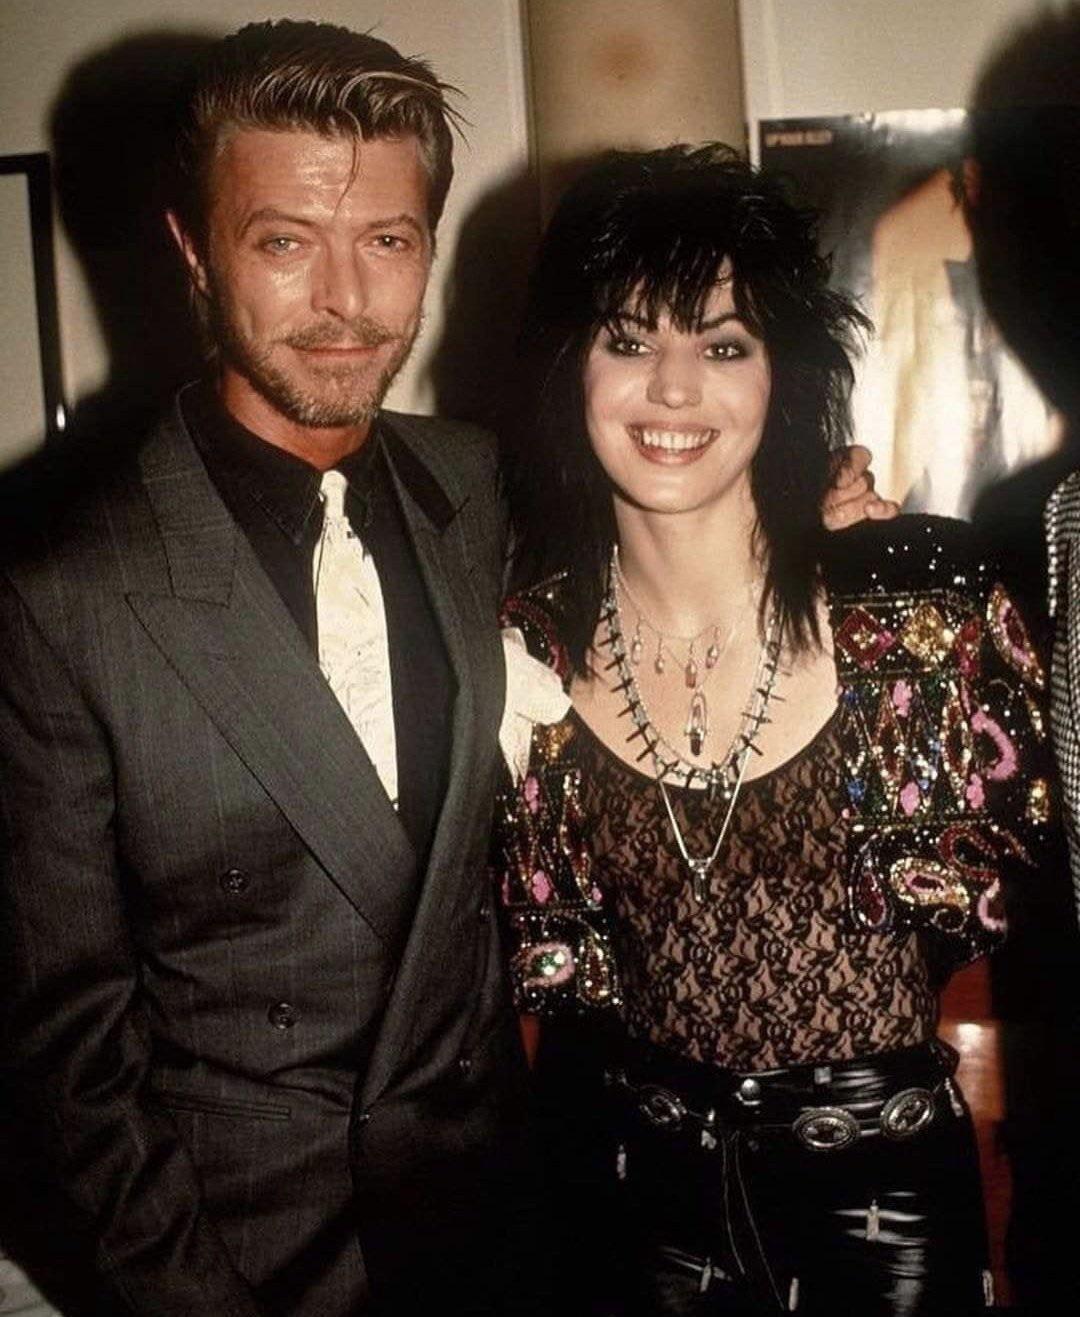 1989 - David Bowie shows up to one of Joan Jett’s shows on Broadway, NYC.jpg